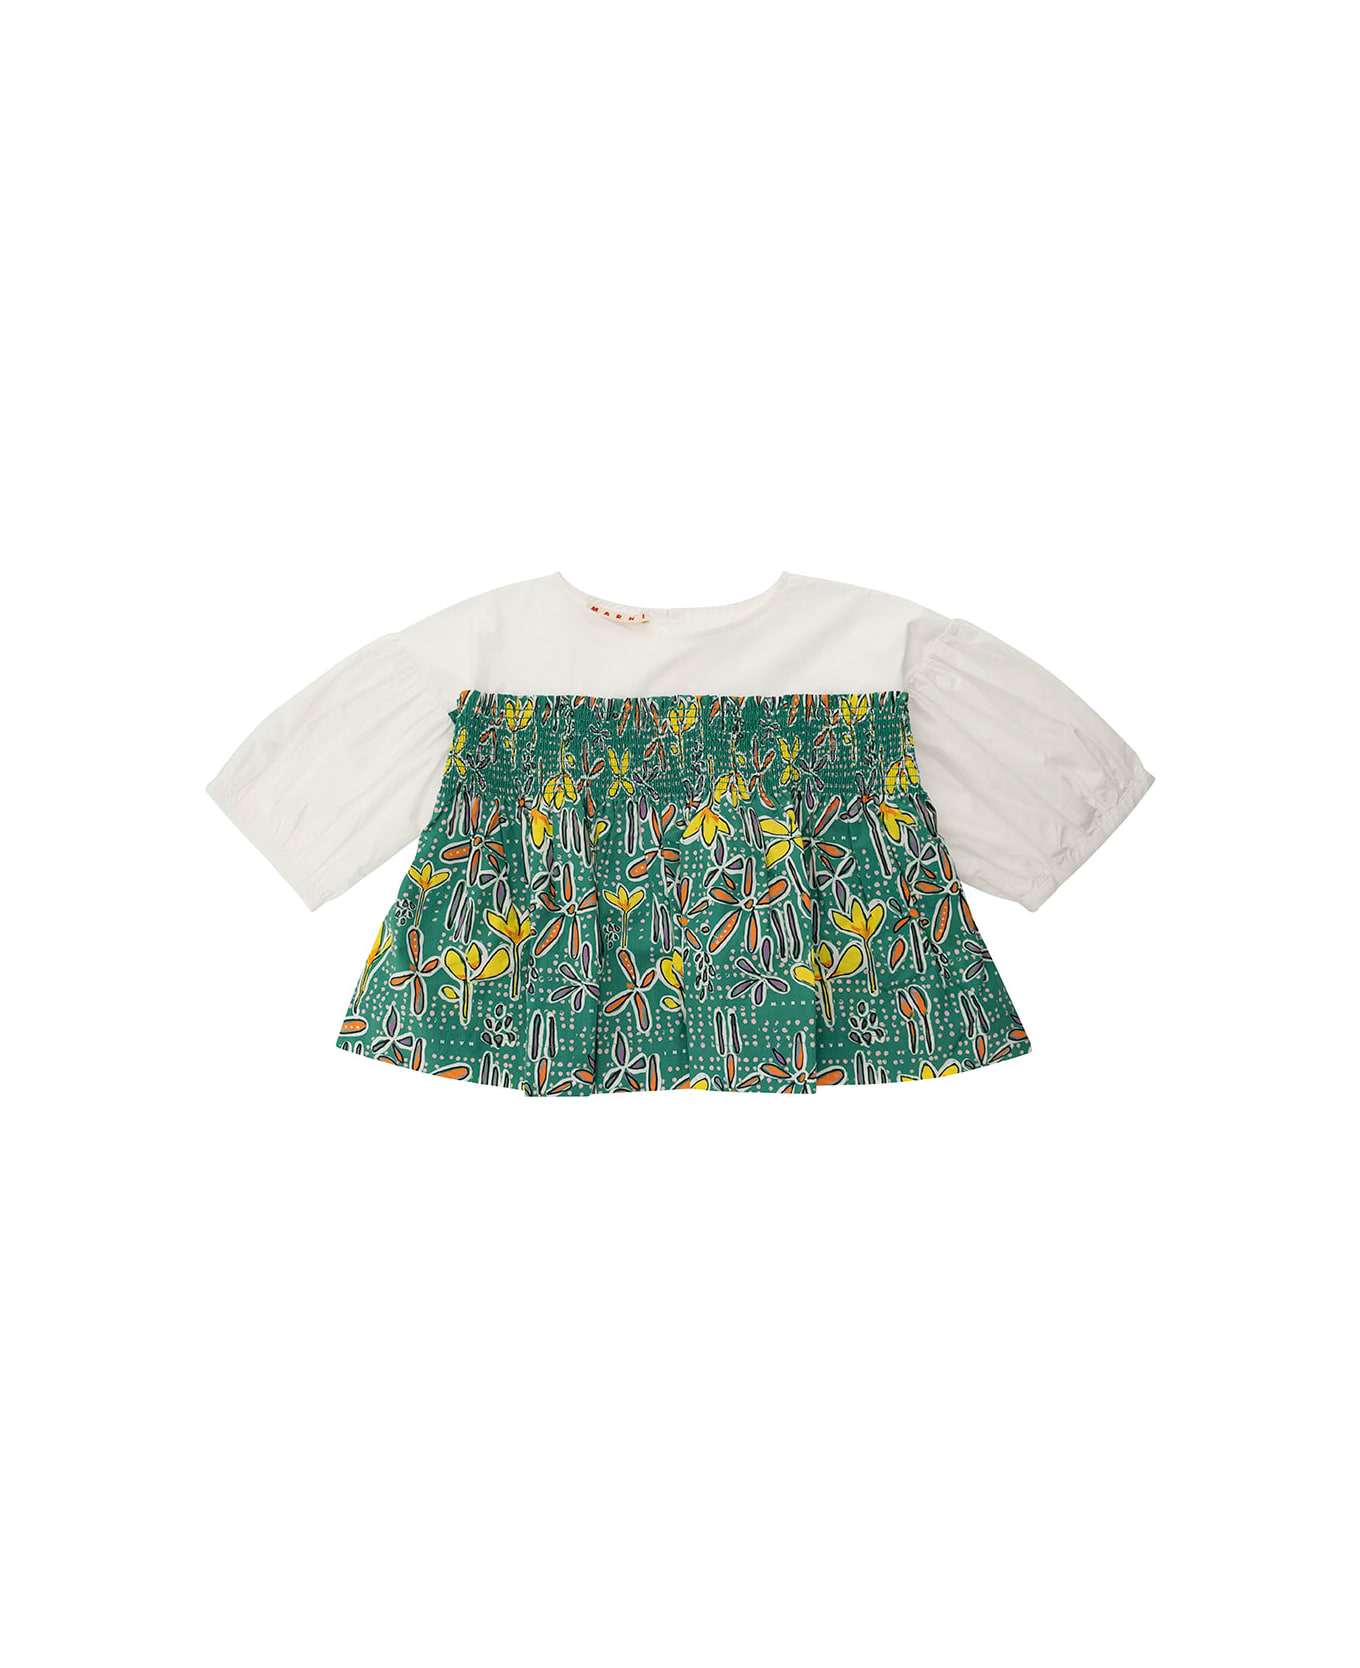 Marni Multicolor Blouse With Flower Printed Elastic Insert In Cotton Girl - Green シャツ